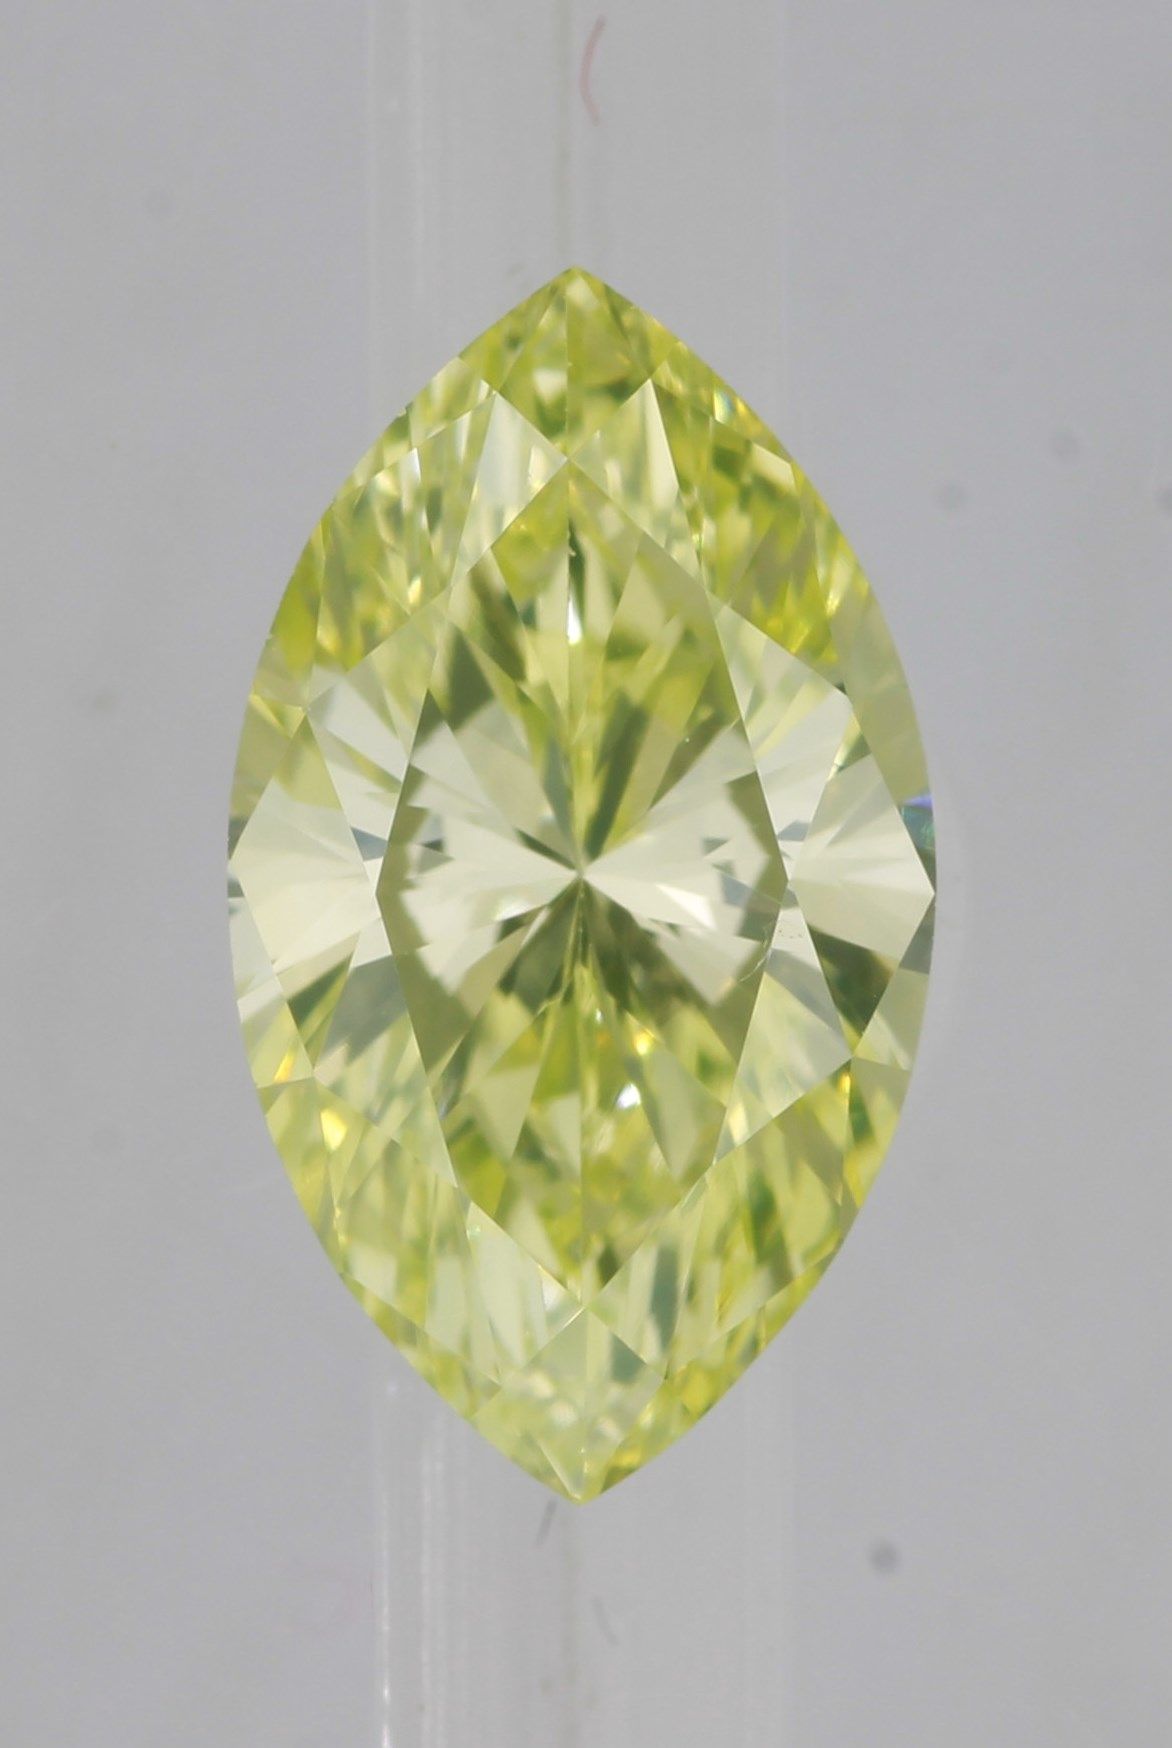 0.60 Carat Marquise Loose Diamond, , VS2, Excellent, GIA Certified | Thumbnail